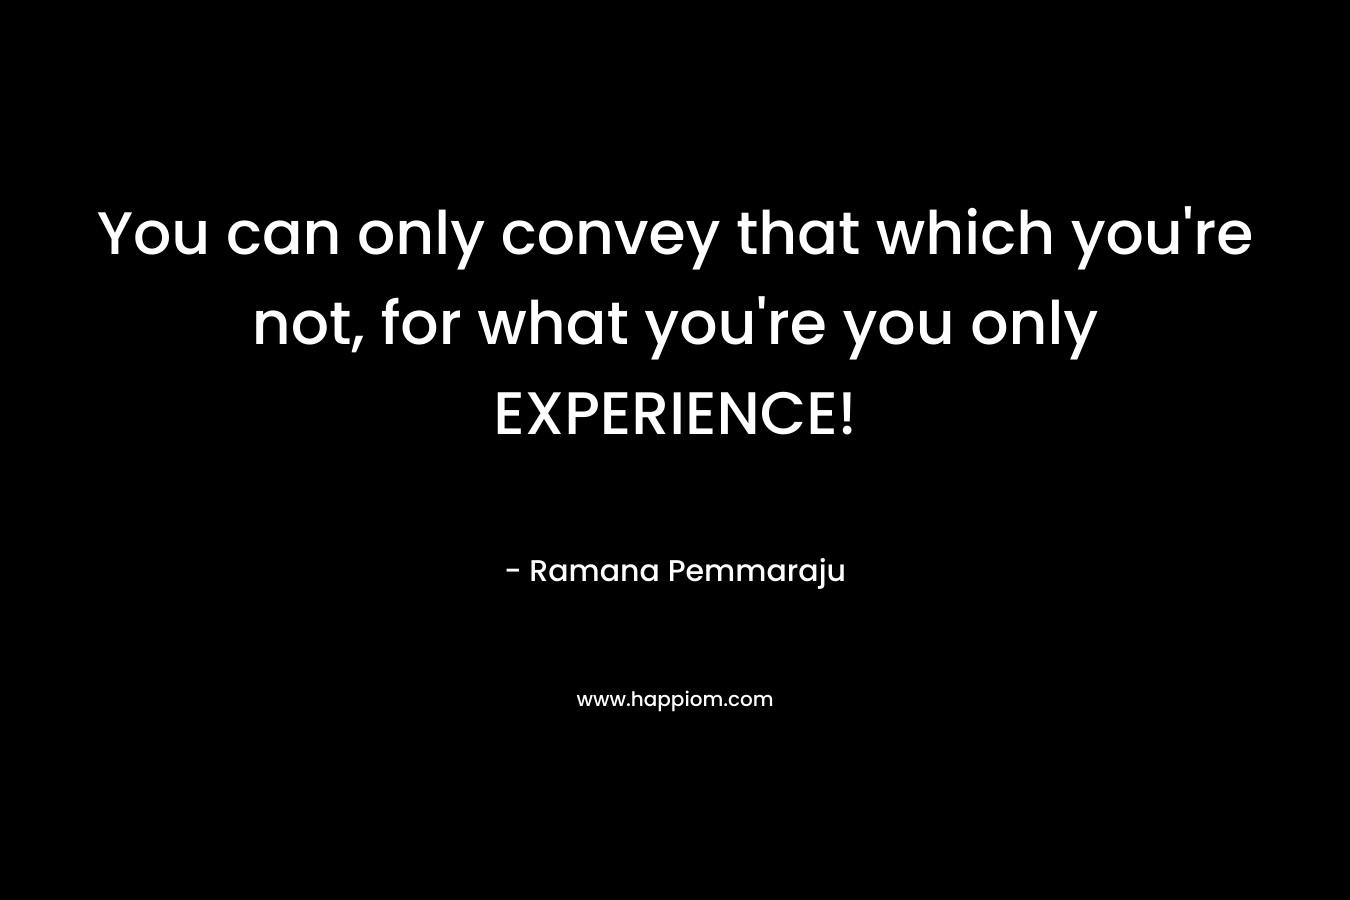 You can only convey that which you’re not, for what you’re you only EXPERIENCE! – Ramana Pemmaraju